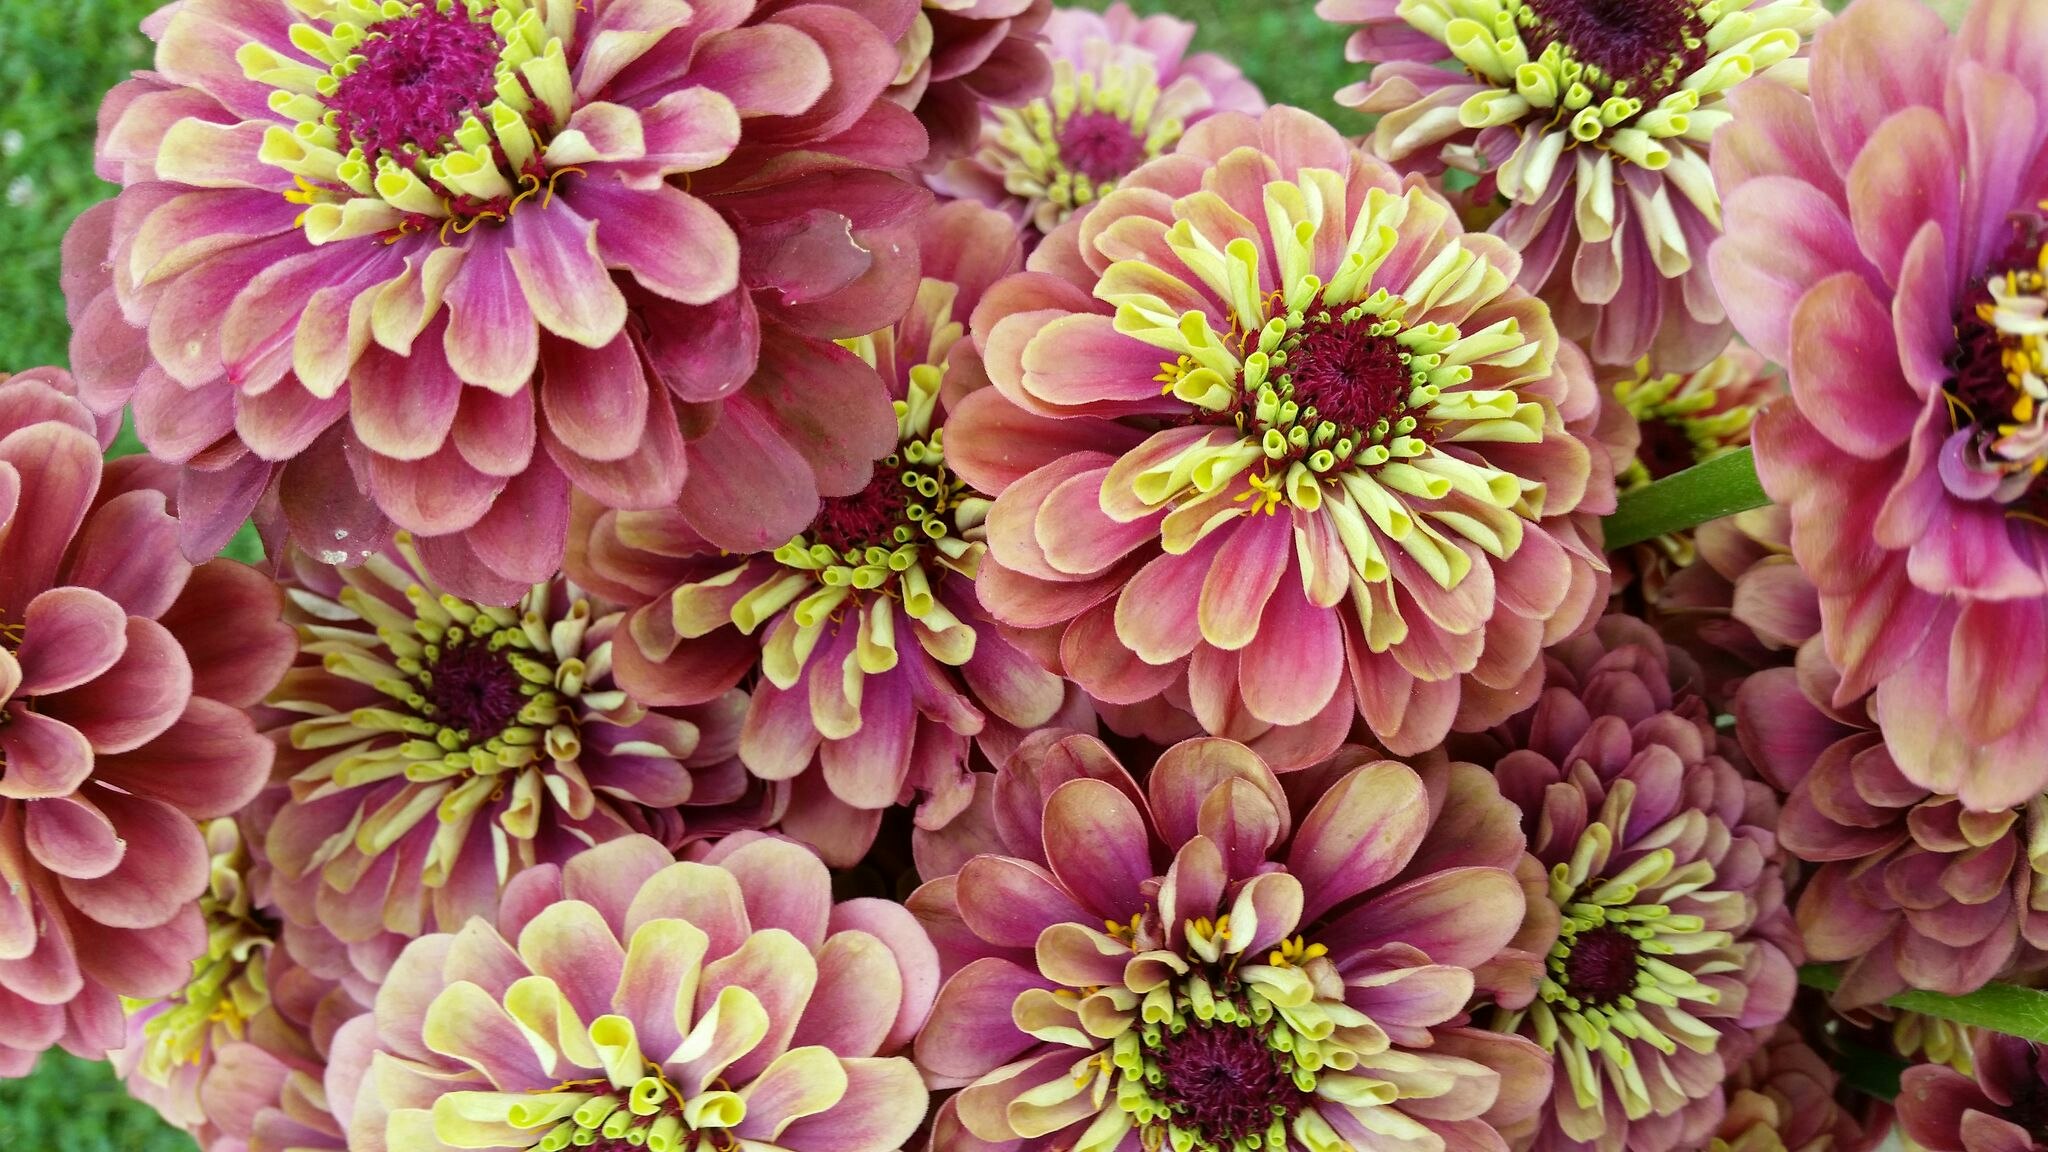 Zinnia "Queen Red Lime"